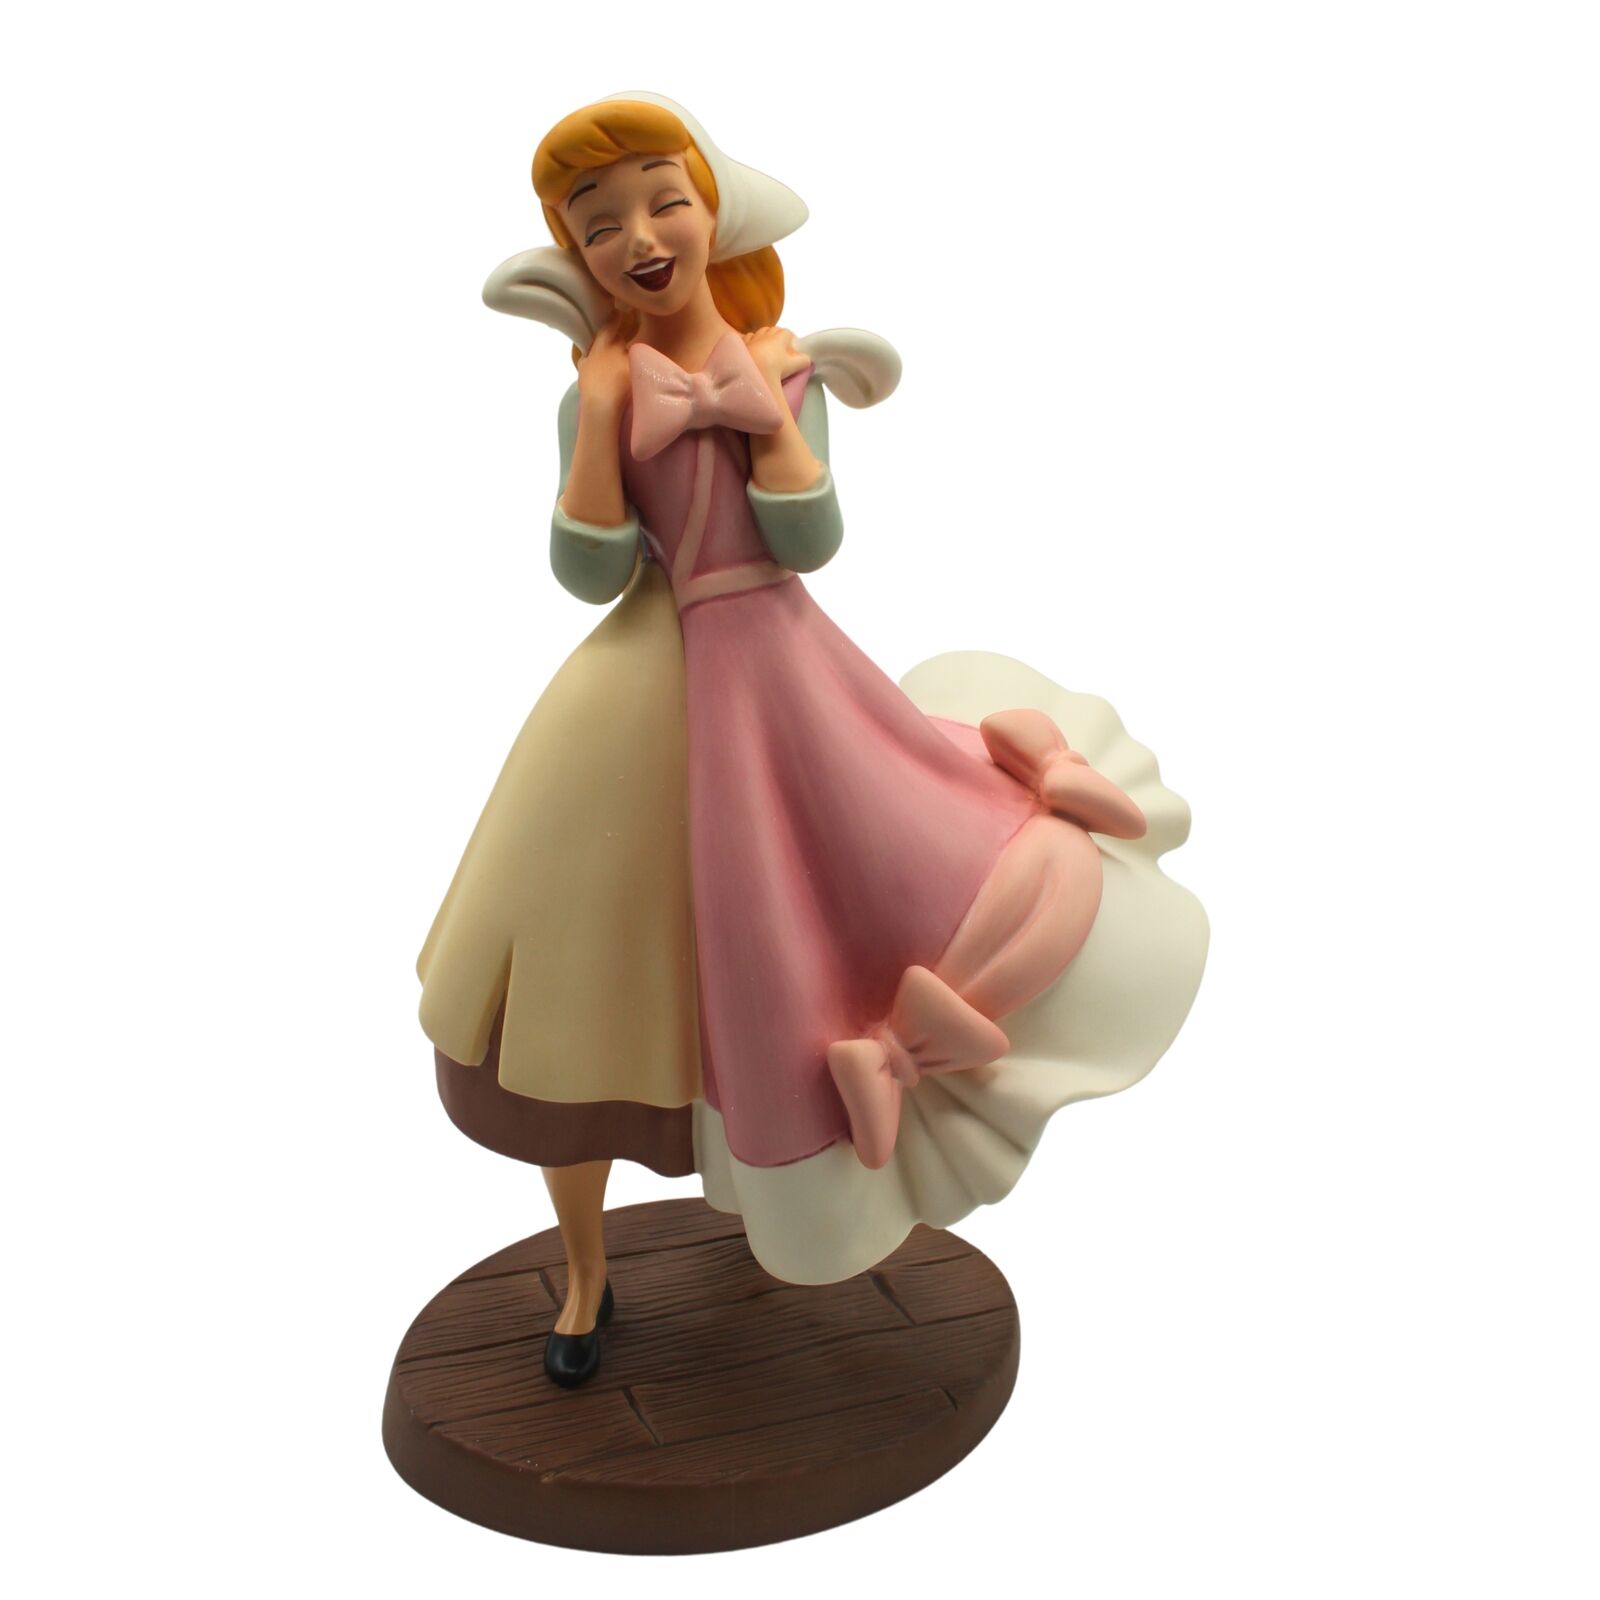 WDCC Cinderella - Oh, Thank You So Much | 1234622 | Disney | New in Box